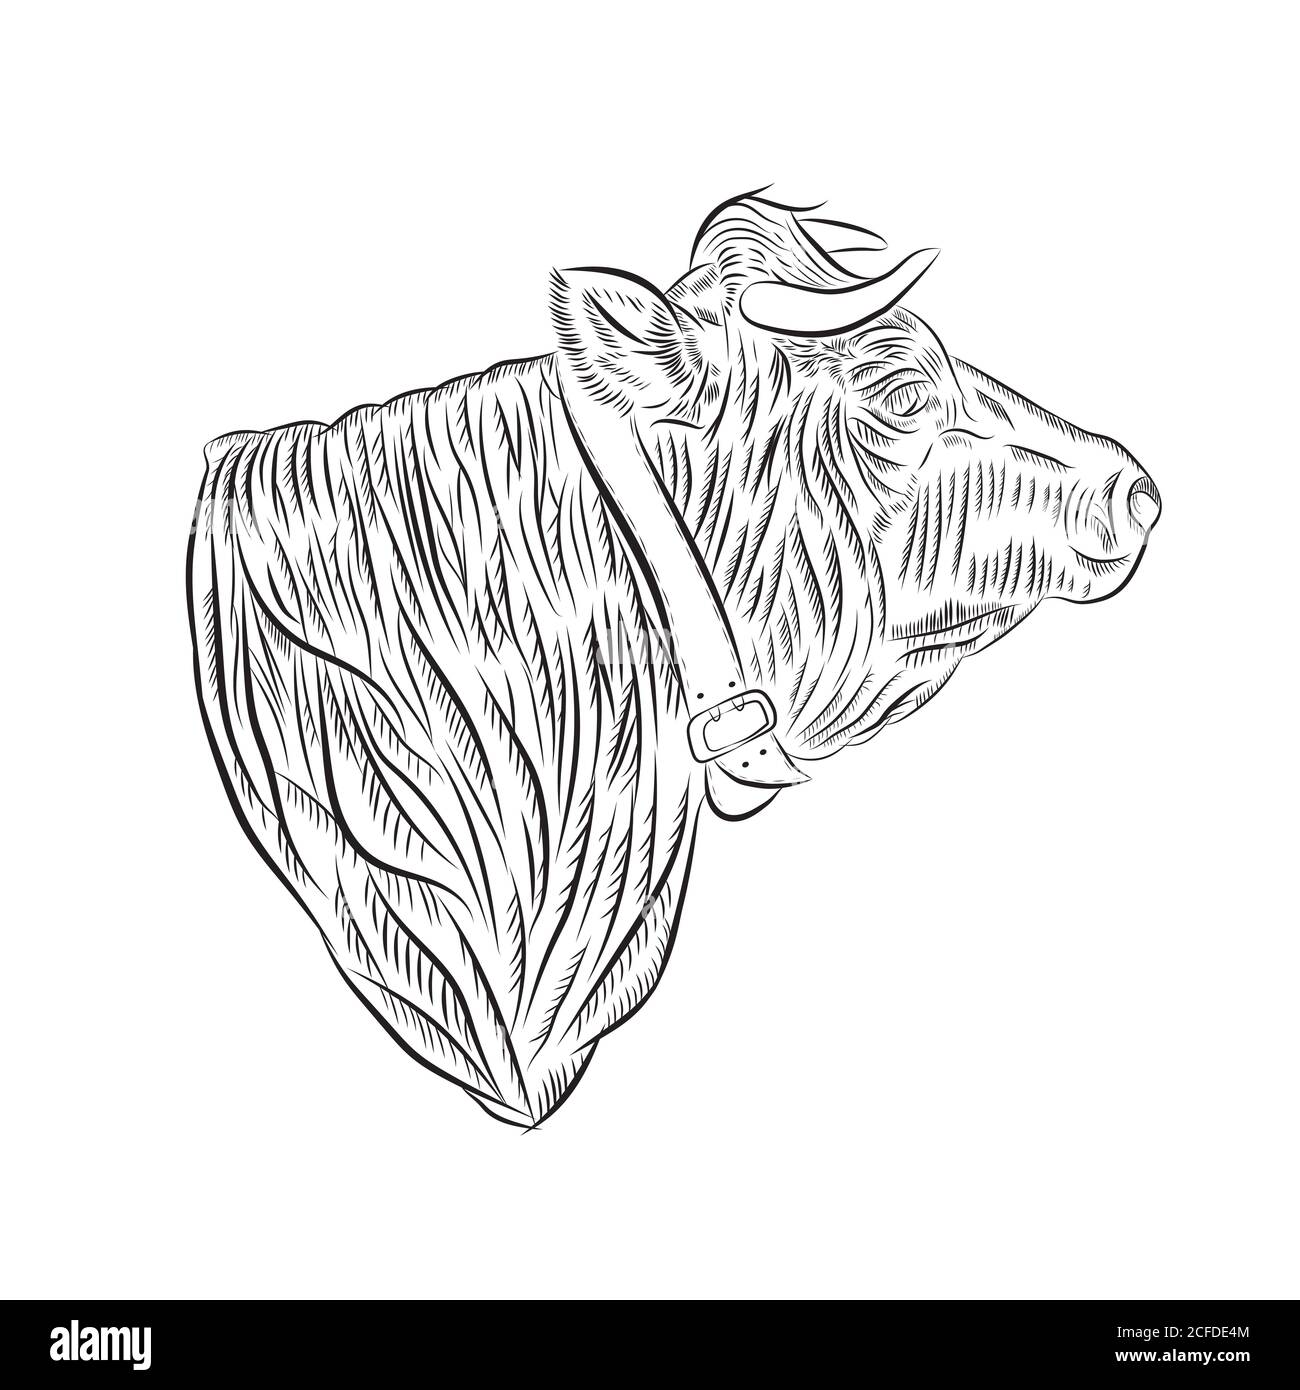 Sketch of a cow's head in the right profile with a belt around the neck vector illustration Stock Photo